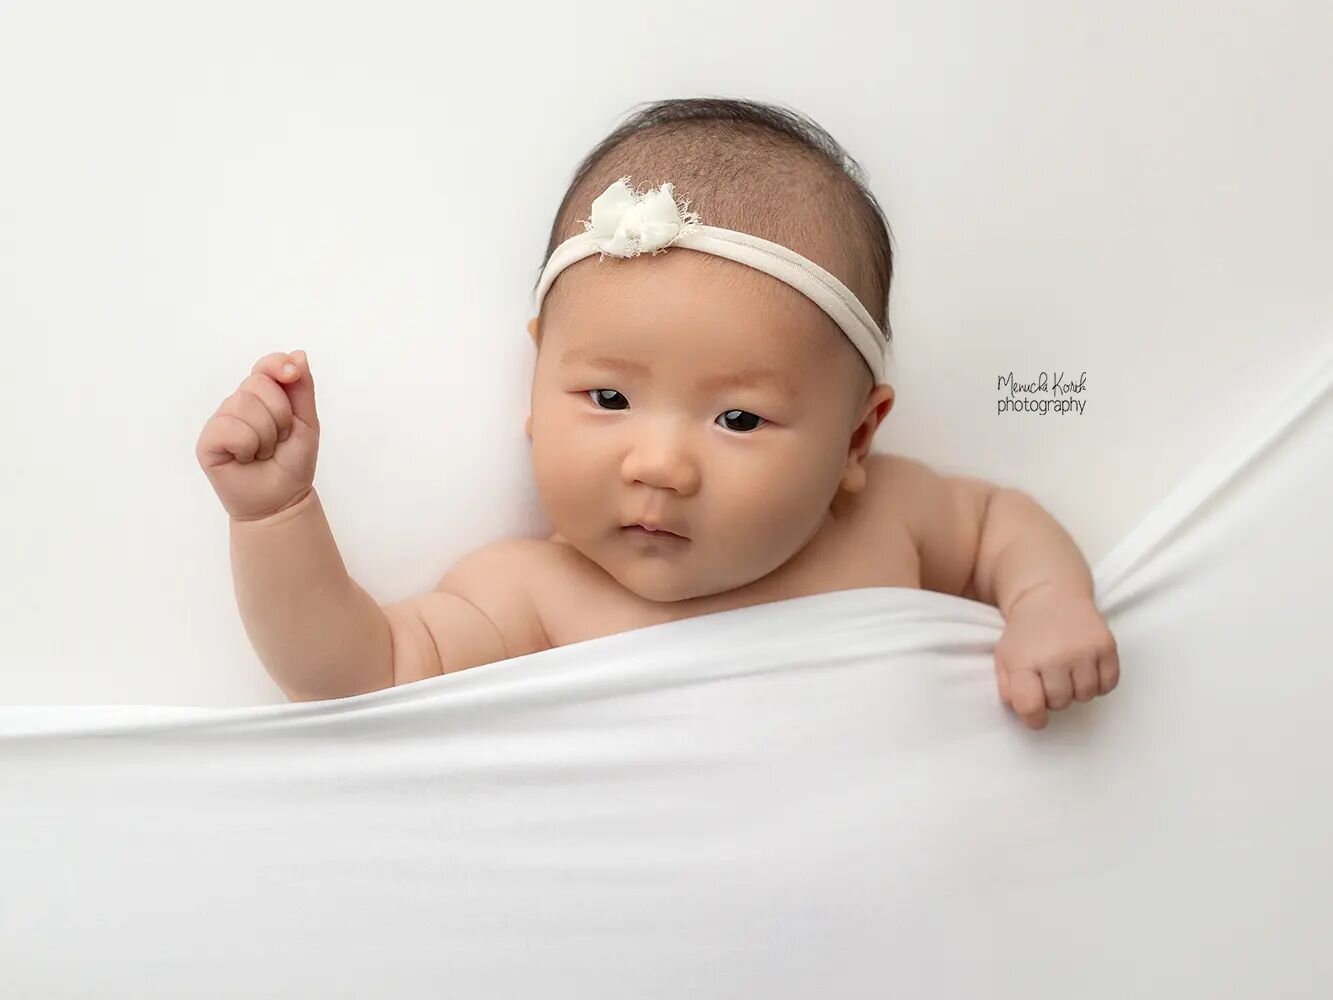 Look at this sweet little face! 

Mum contacted me when her little one was almost 7 weeks old. She was worried that she had missed the opportunity to do newborn photos. I explained that it is definitely not too late and while it is true that at this 